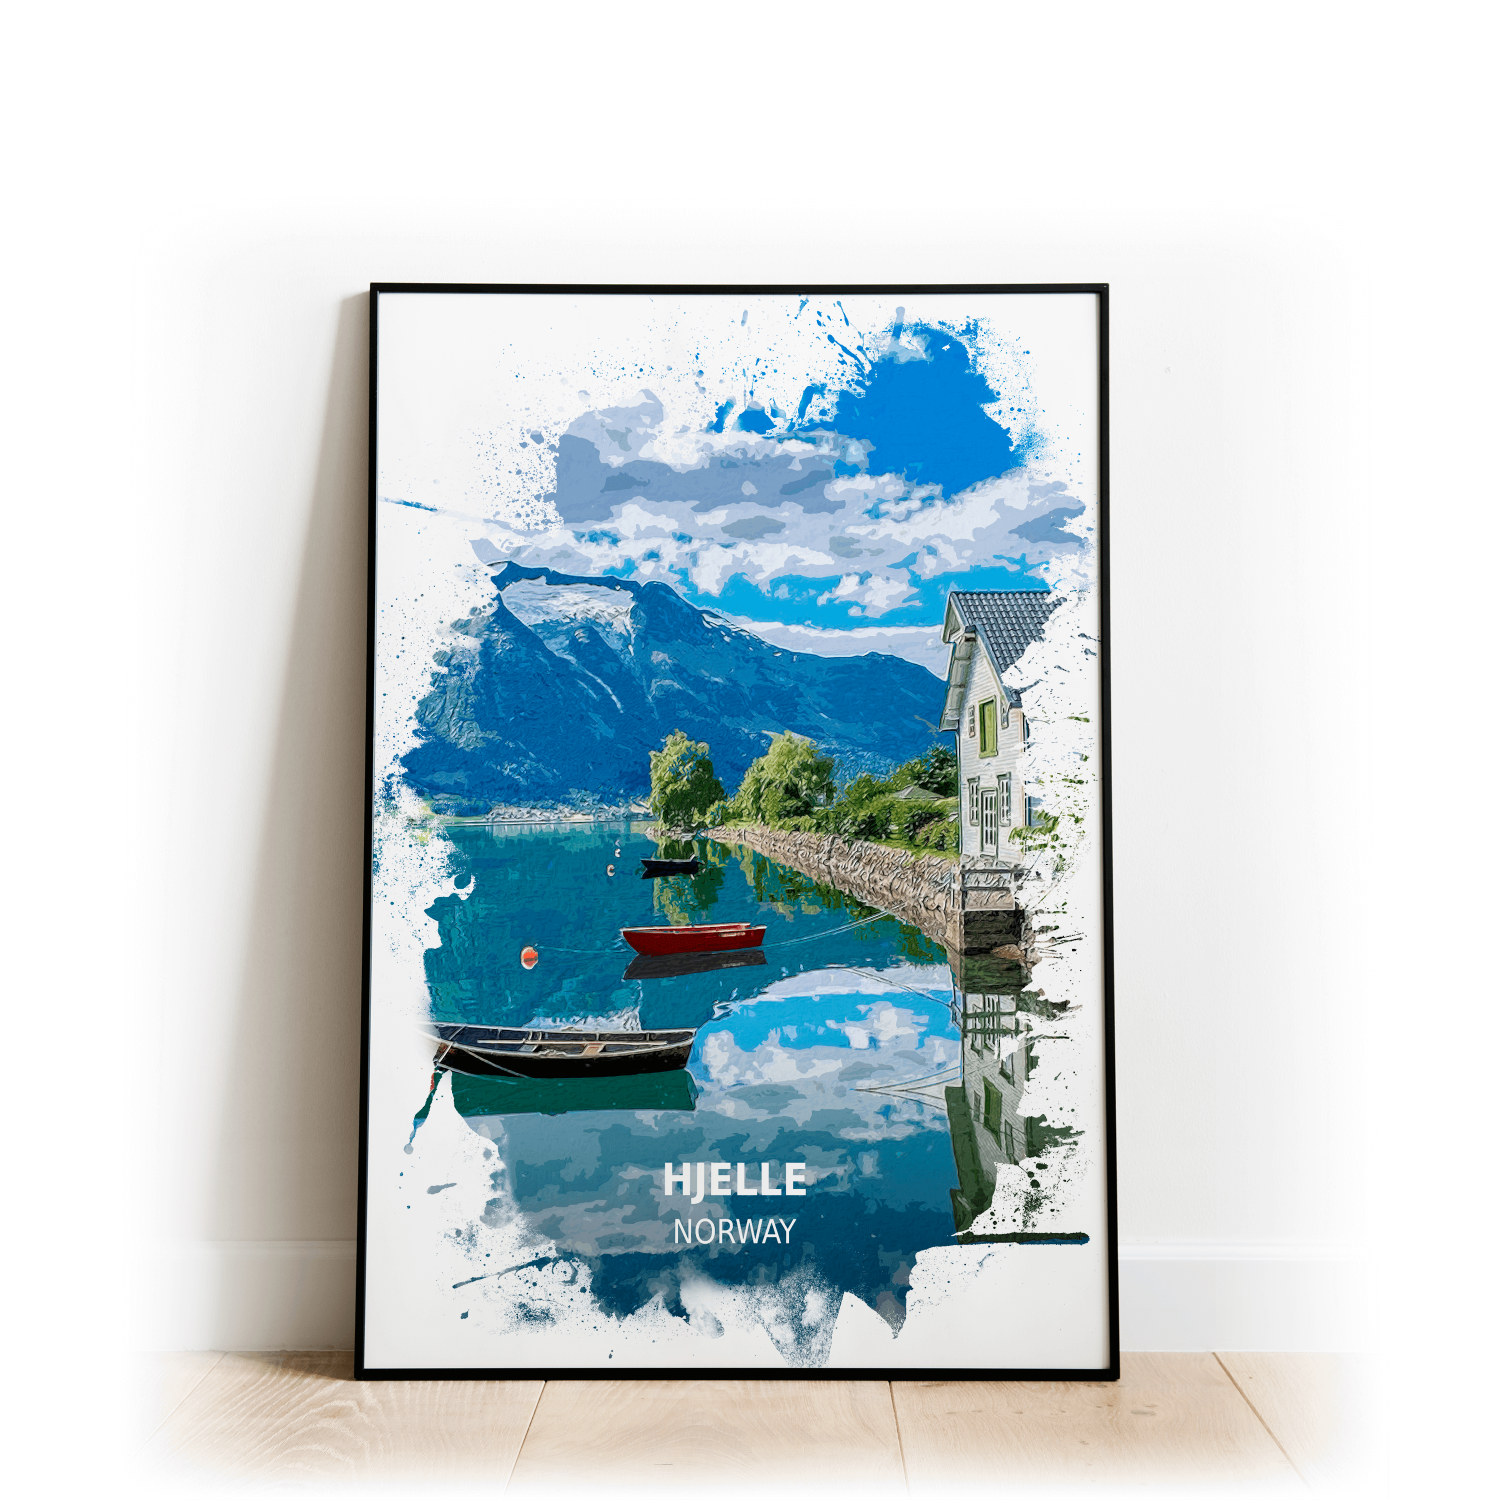 Hjelle - Norway - Print - A4 - Standard - Print Only